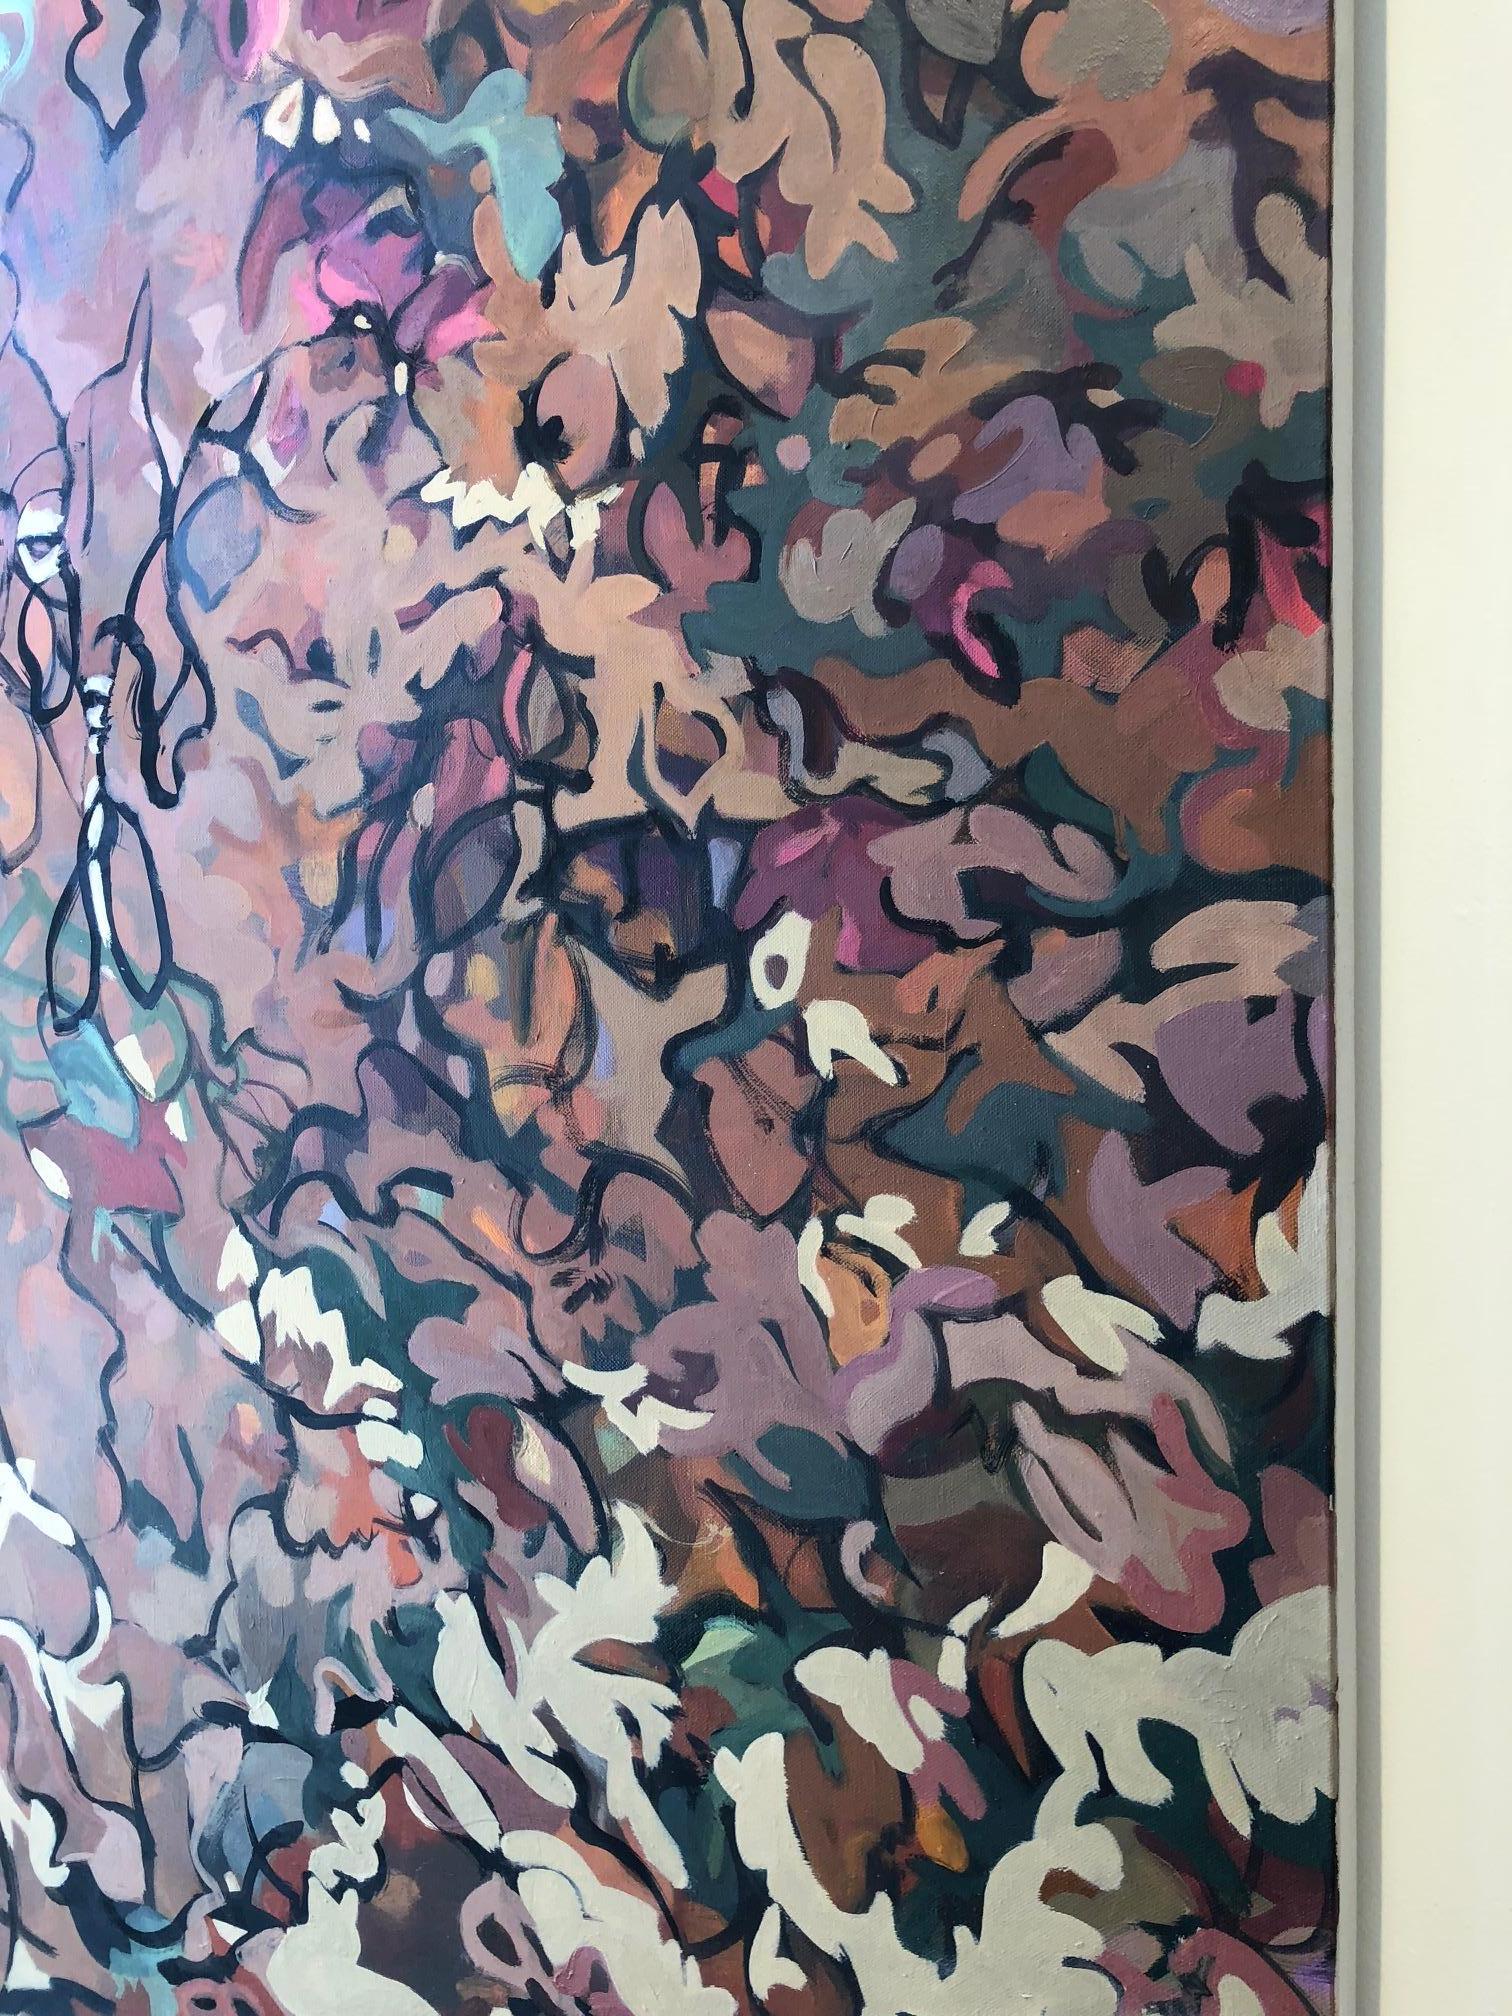 Falling Leaves / oil on canvas - 60 x 56 inches 1